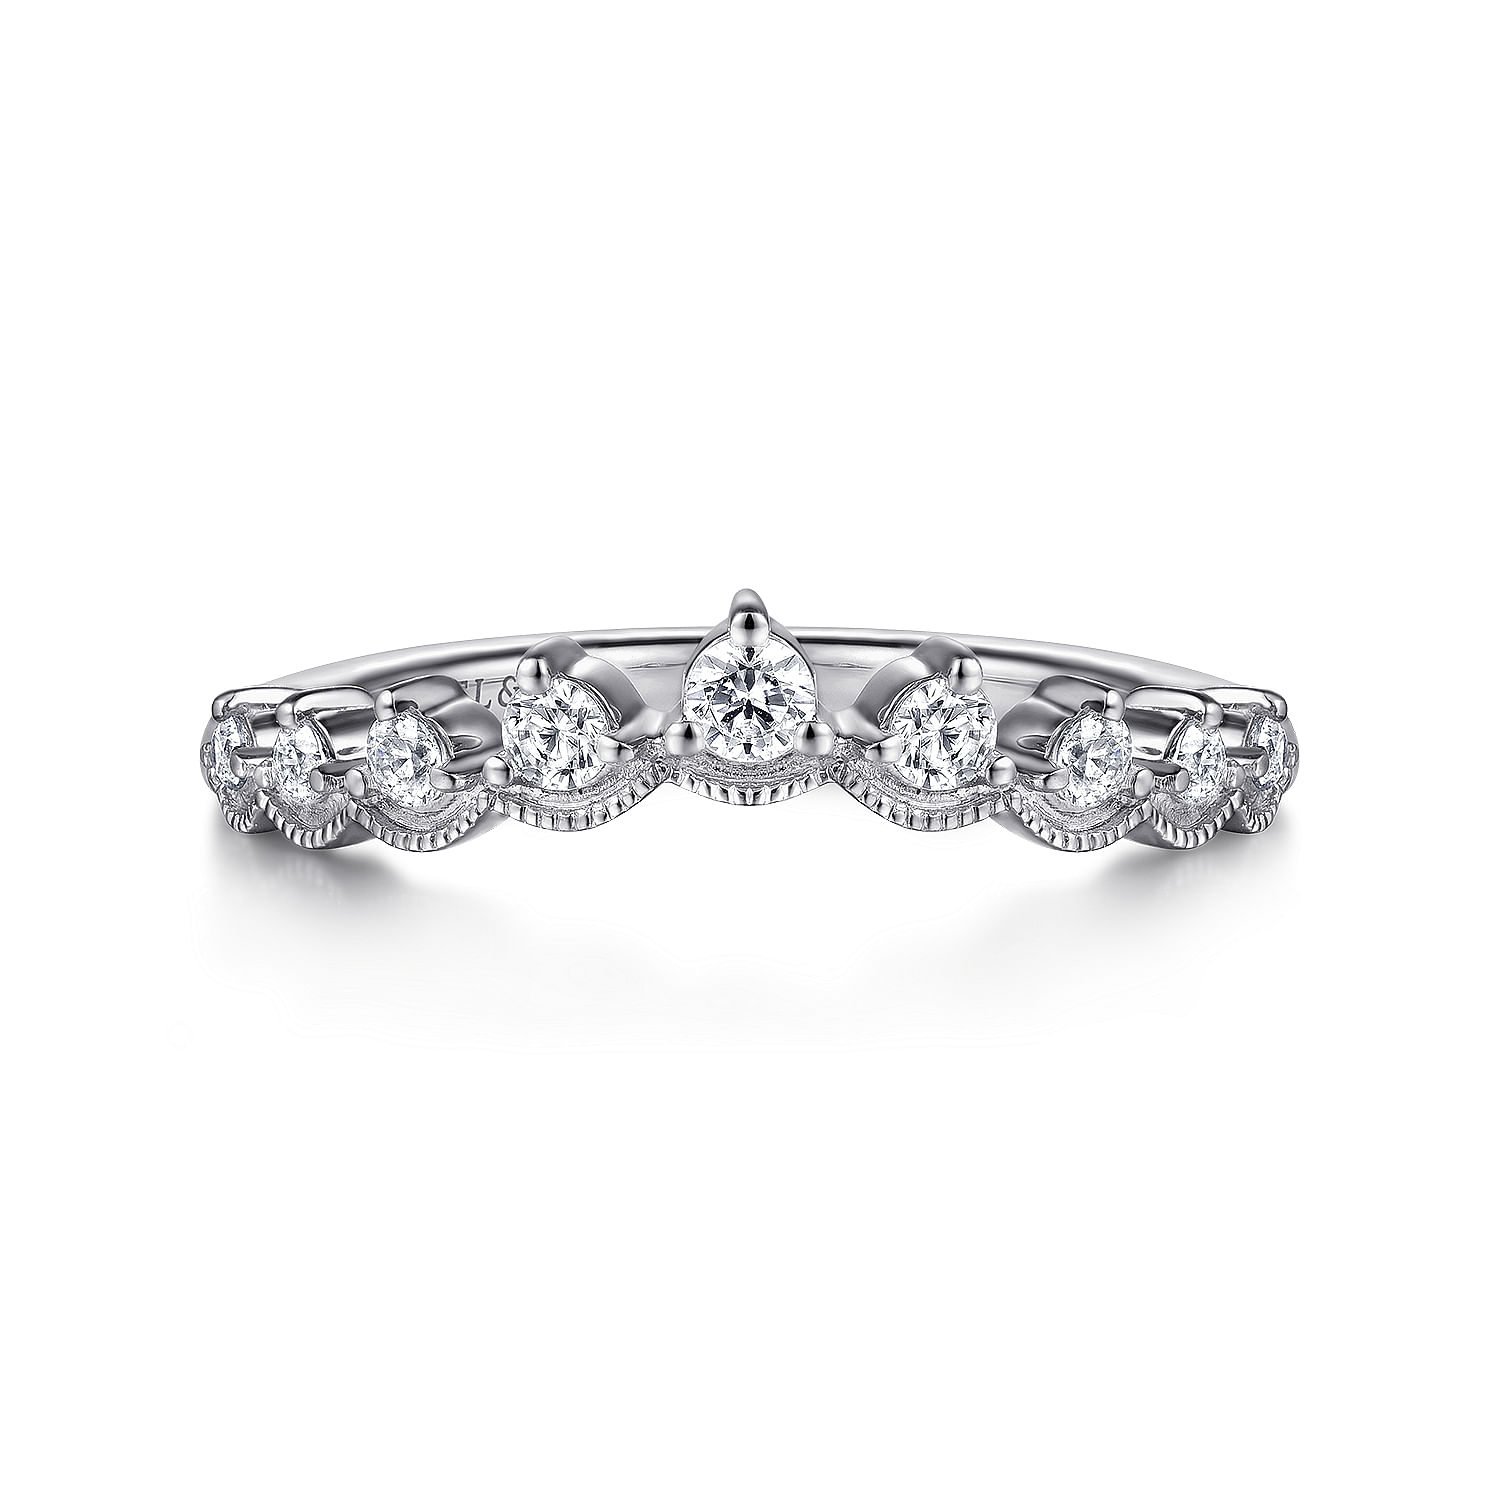 Vintage Inspired 14K White Gold Curved Diamond Anniversary Band